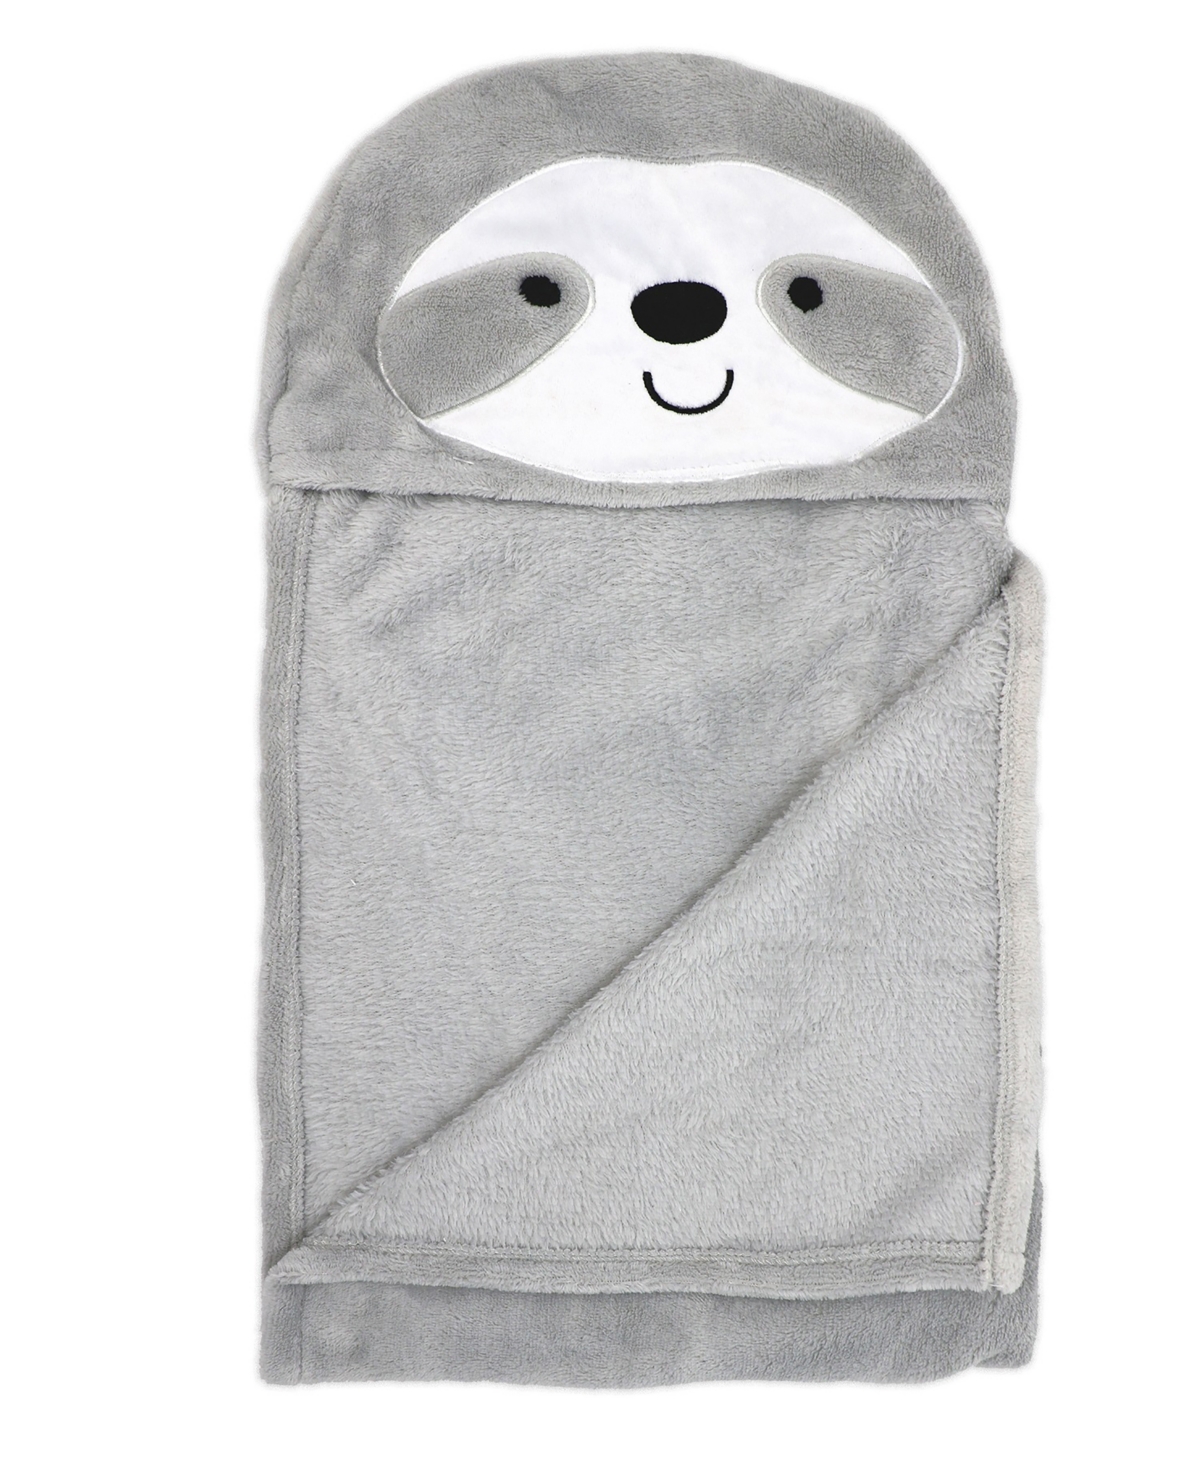 3 Stories Trading Baby Boys And Baby Girls Sloth Hooded Blanket In Gray